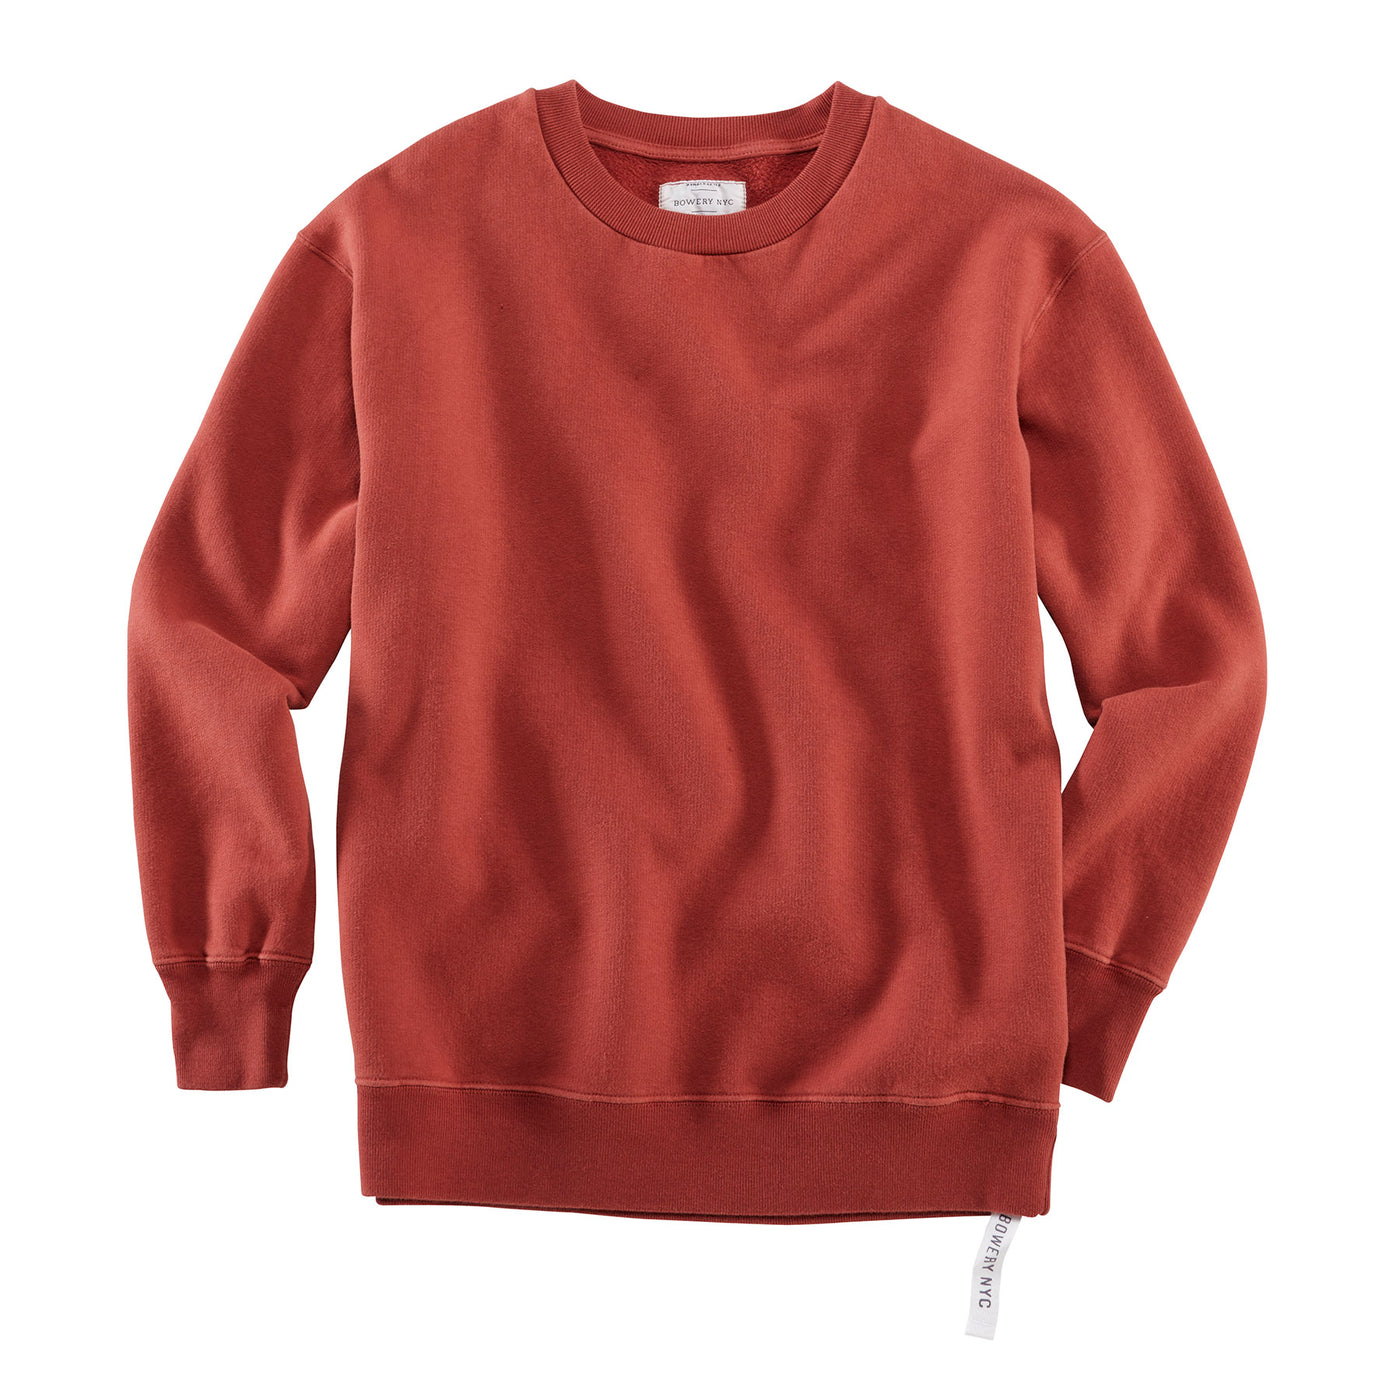 Bowery NYC Women's Essential Rust Sweater